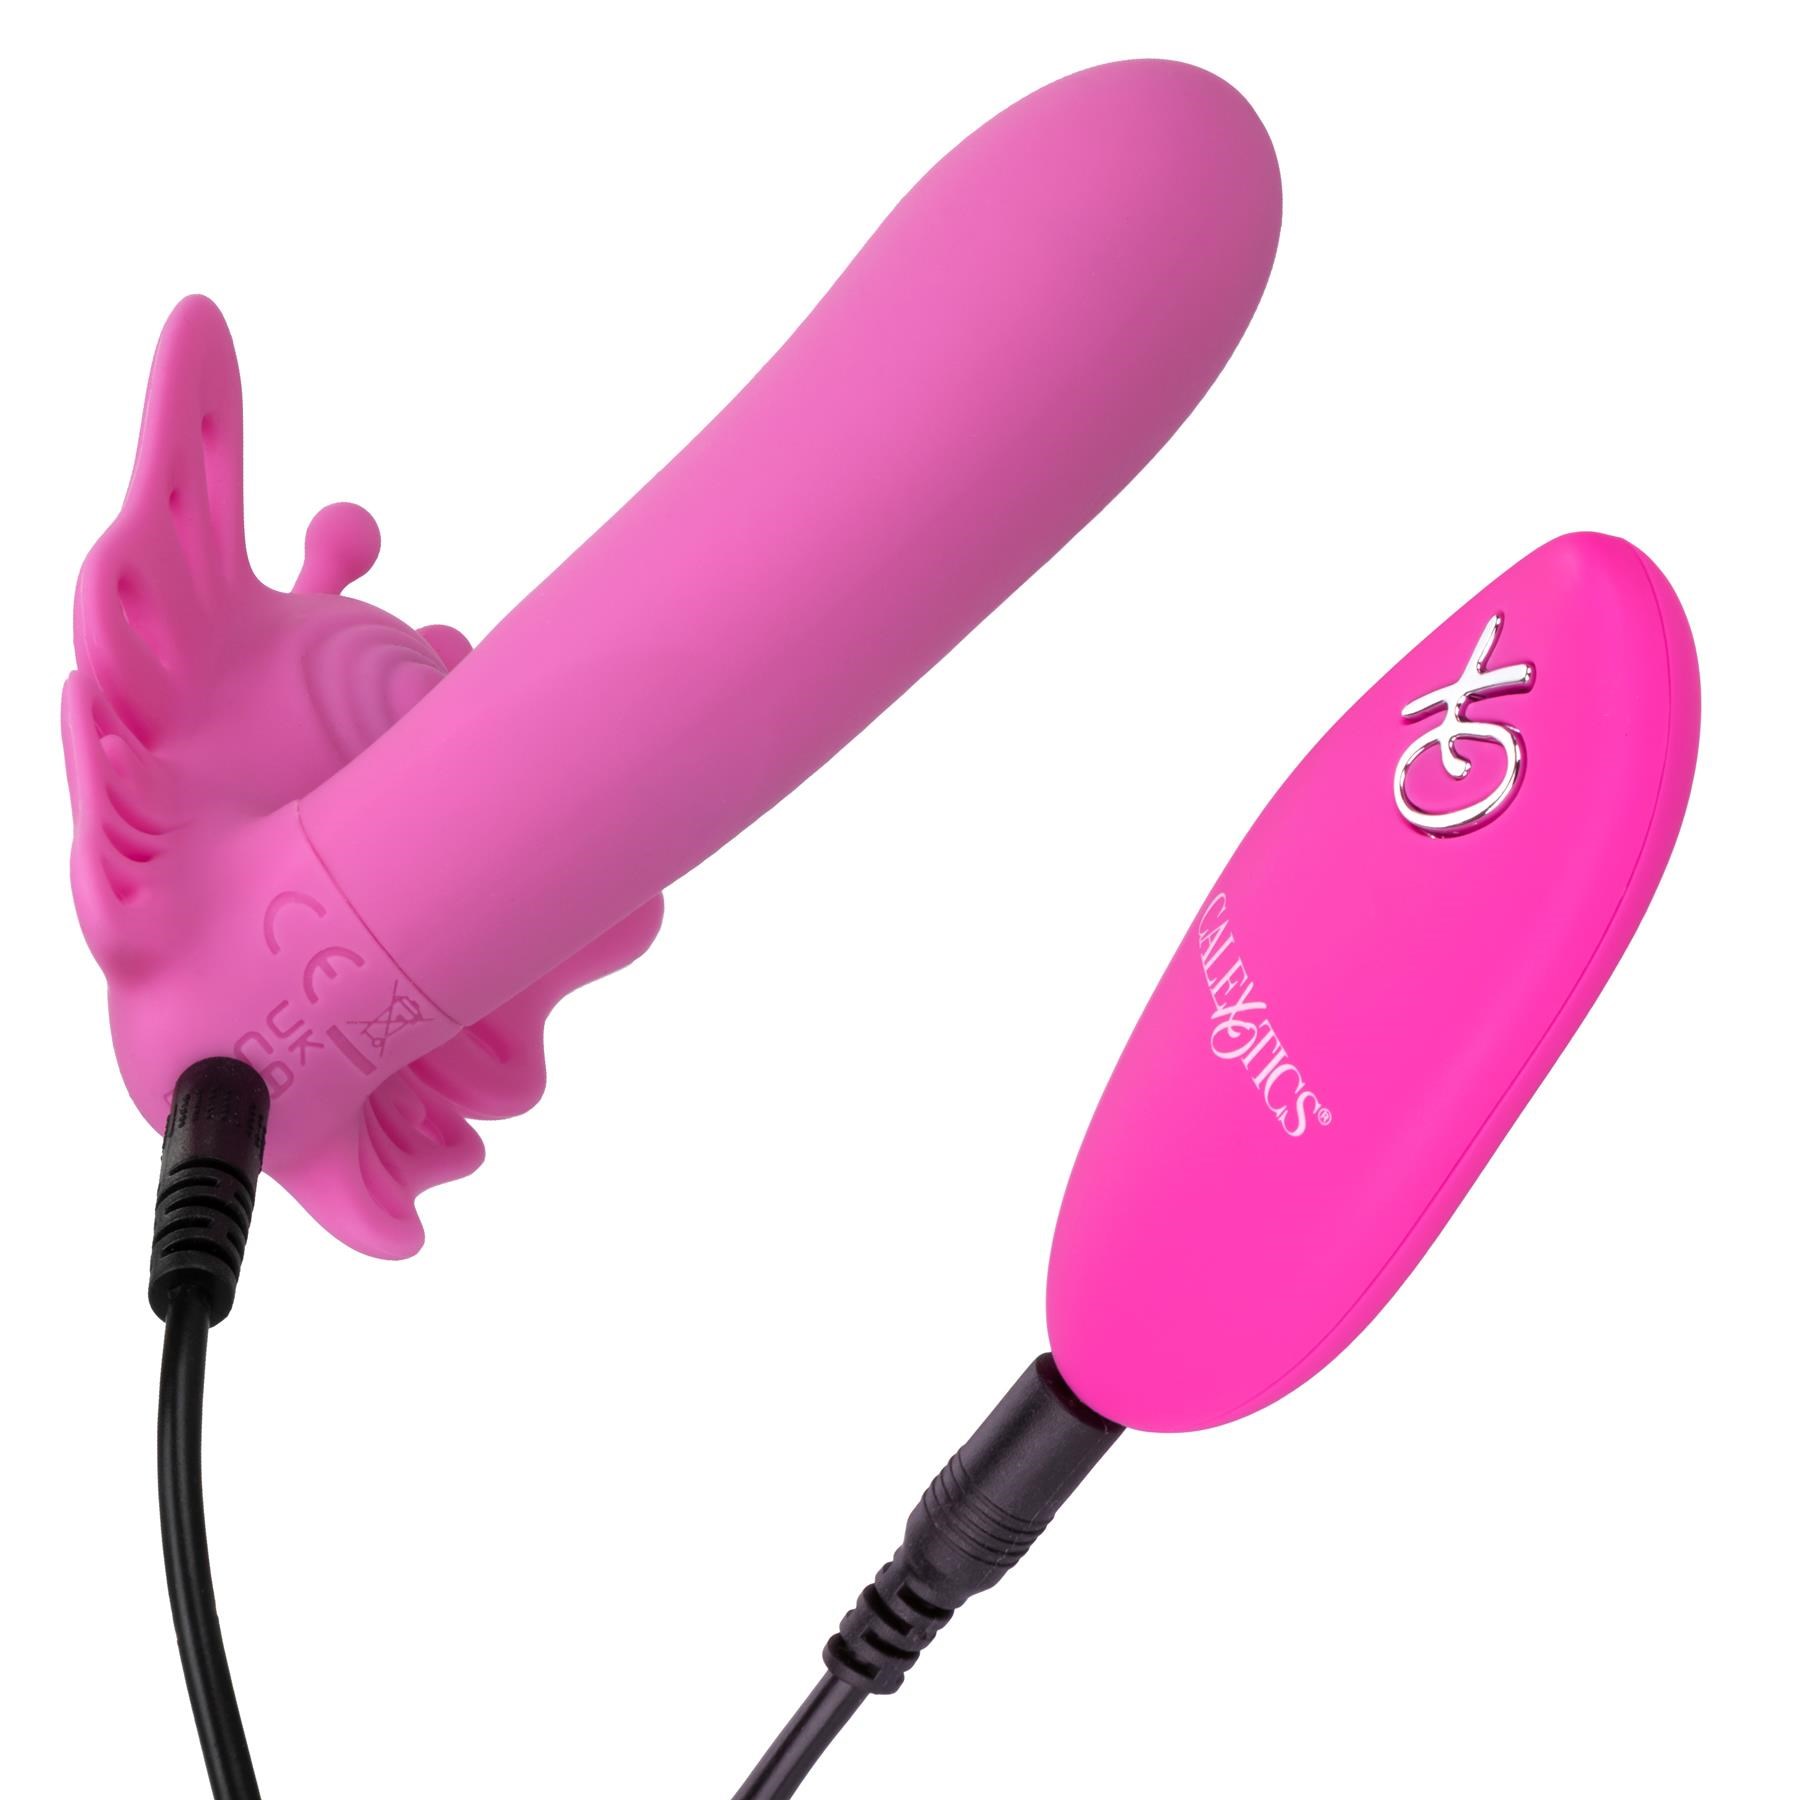 Venus Butterfly Pulsating Venus G - Showing Where Charging Cables Are Placed